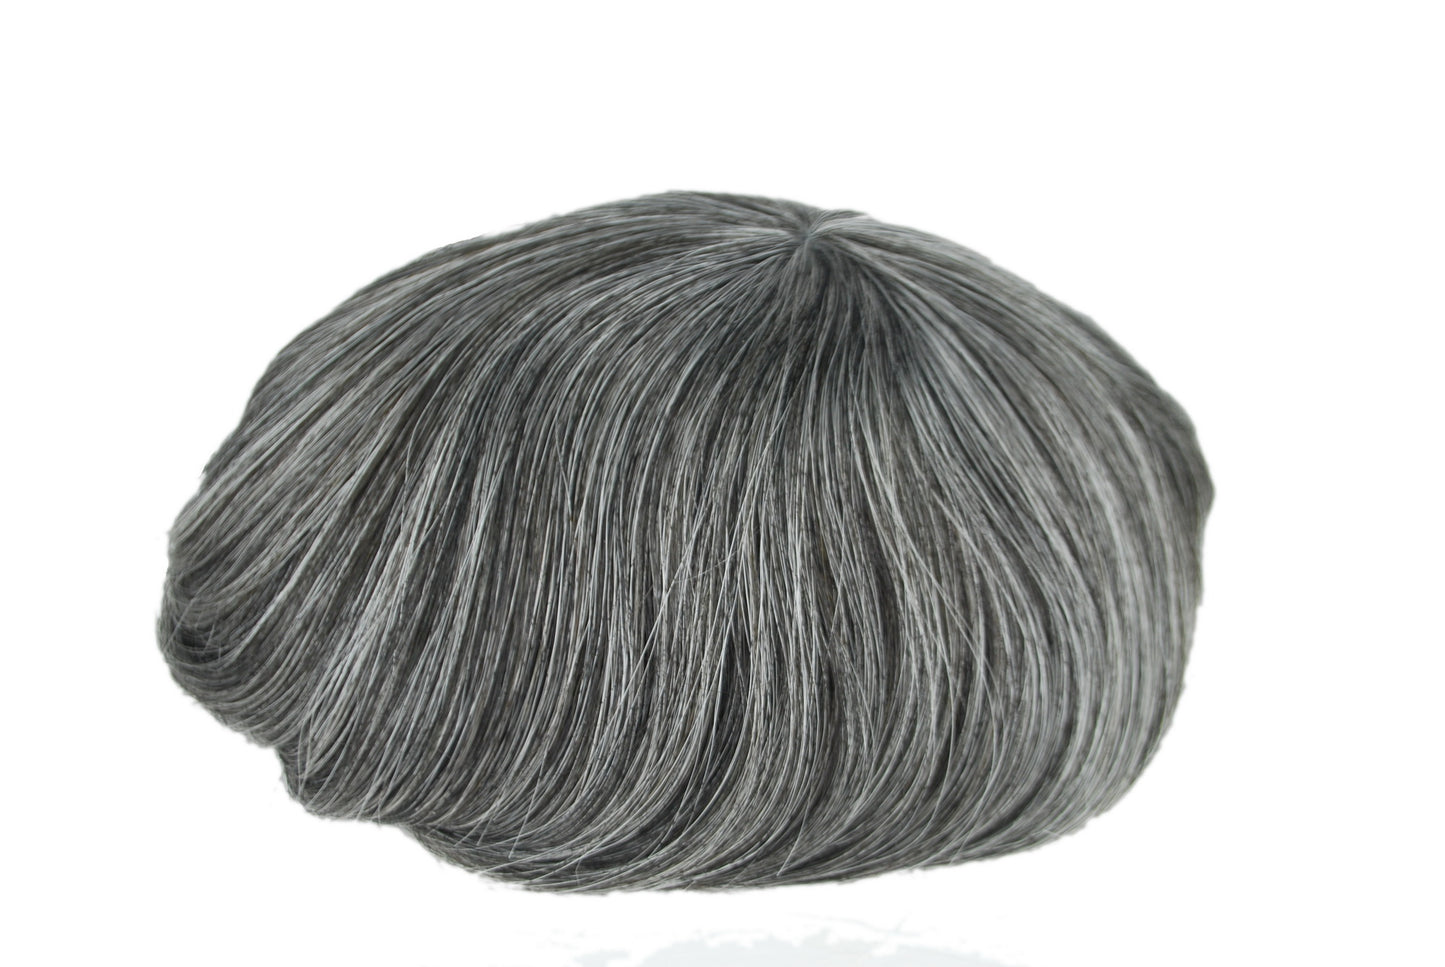 Full Lace Natural Black Mixed Grey Hair System 1B40 PU With Lace Toupee For Men